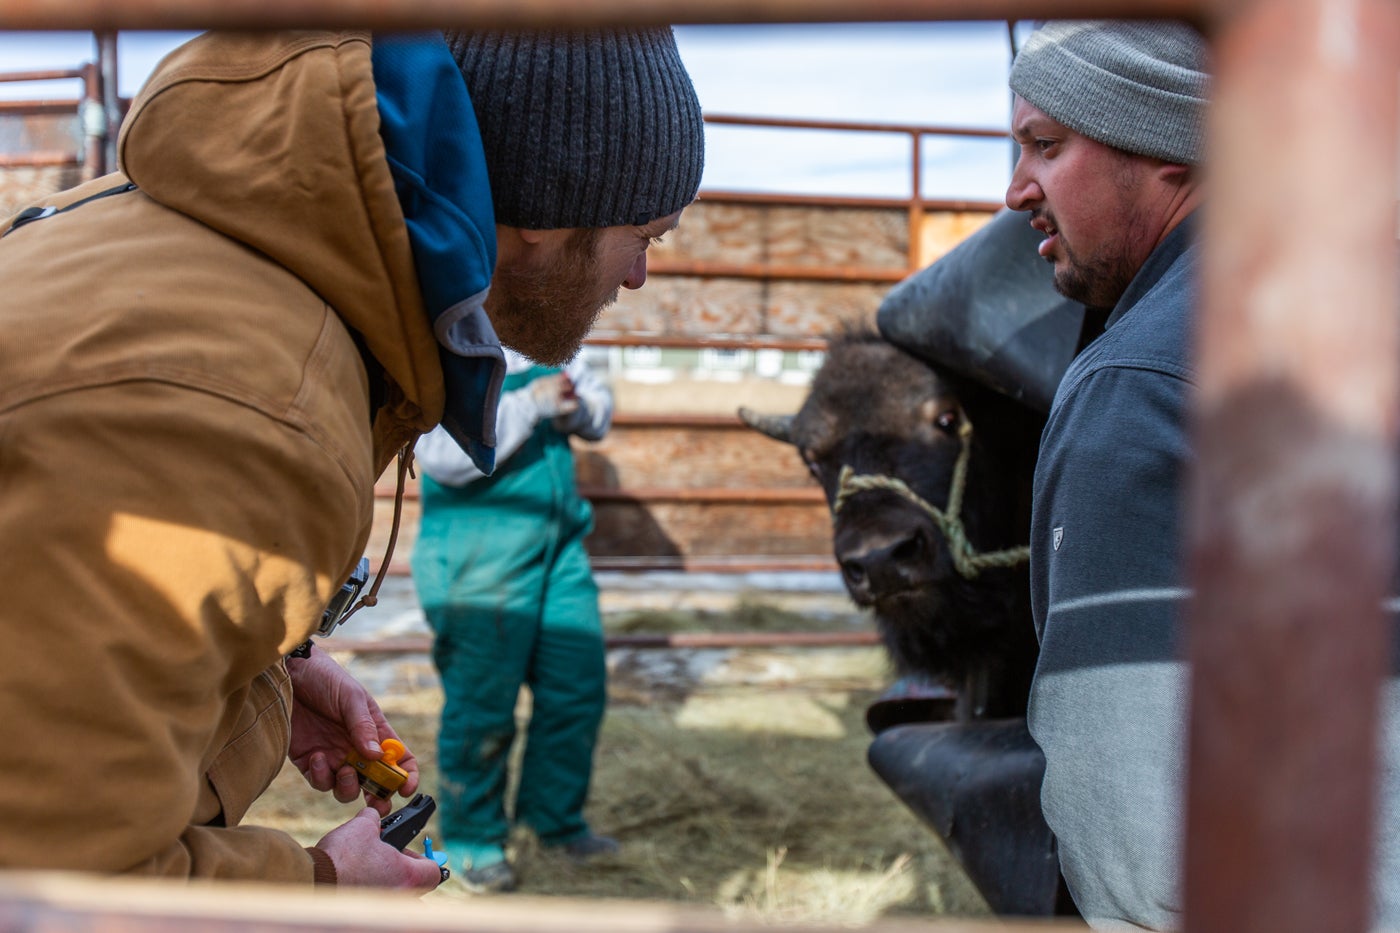 Two researchers discuss whether the bison that can be seen in the background will receive a solar GPS ear tag. The bison is standing in the hydraulic squeeze looking toward the researchers.